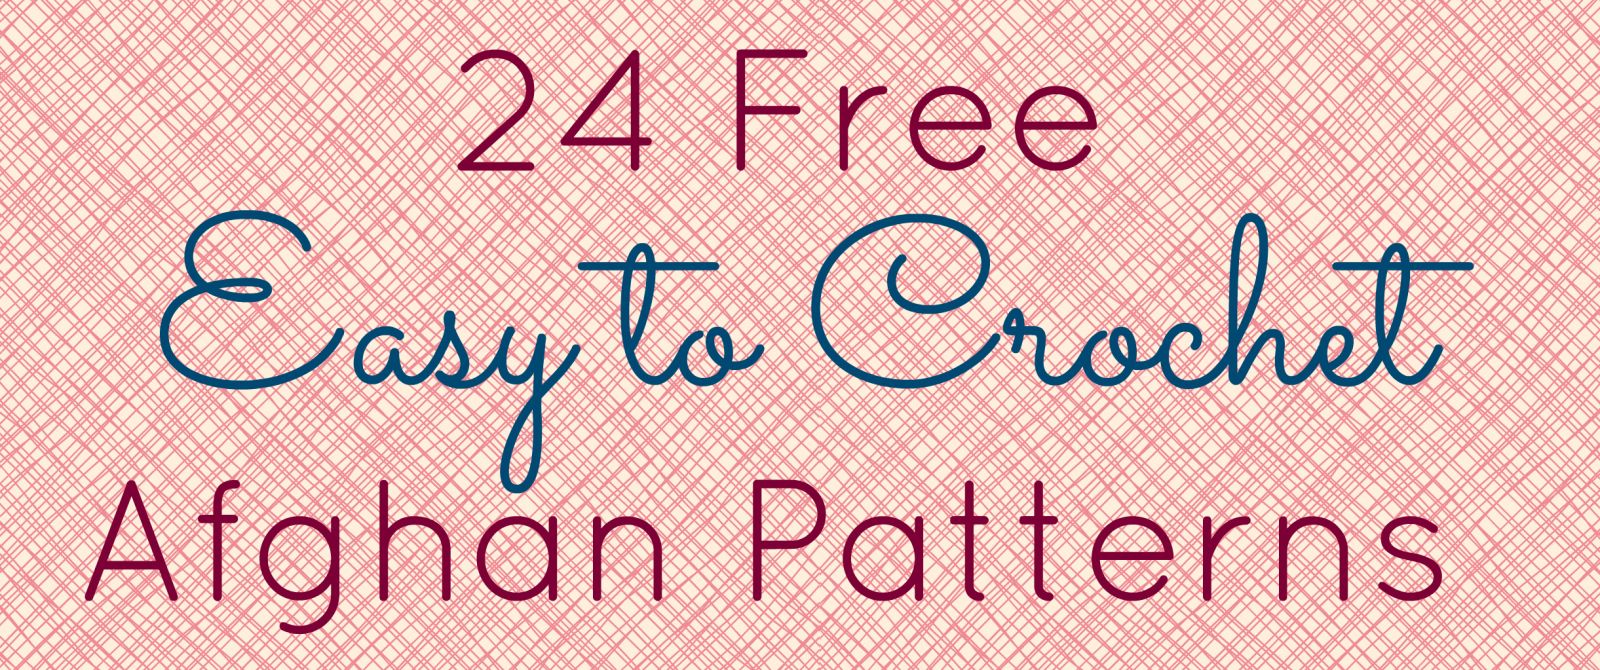 Free Easy to Crochet Afghan Patterns